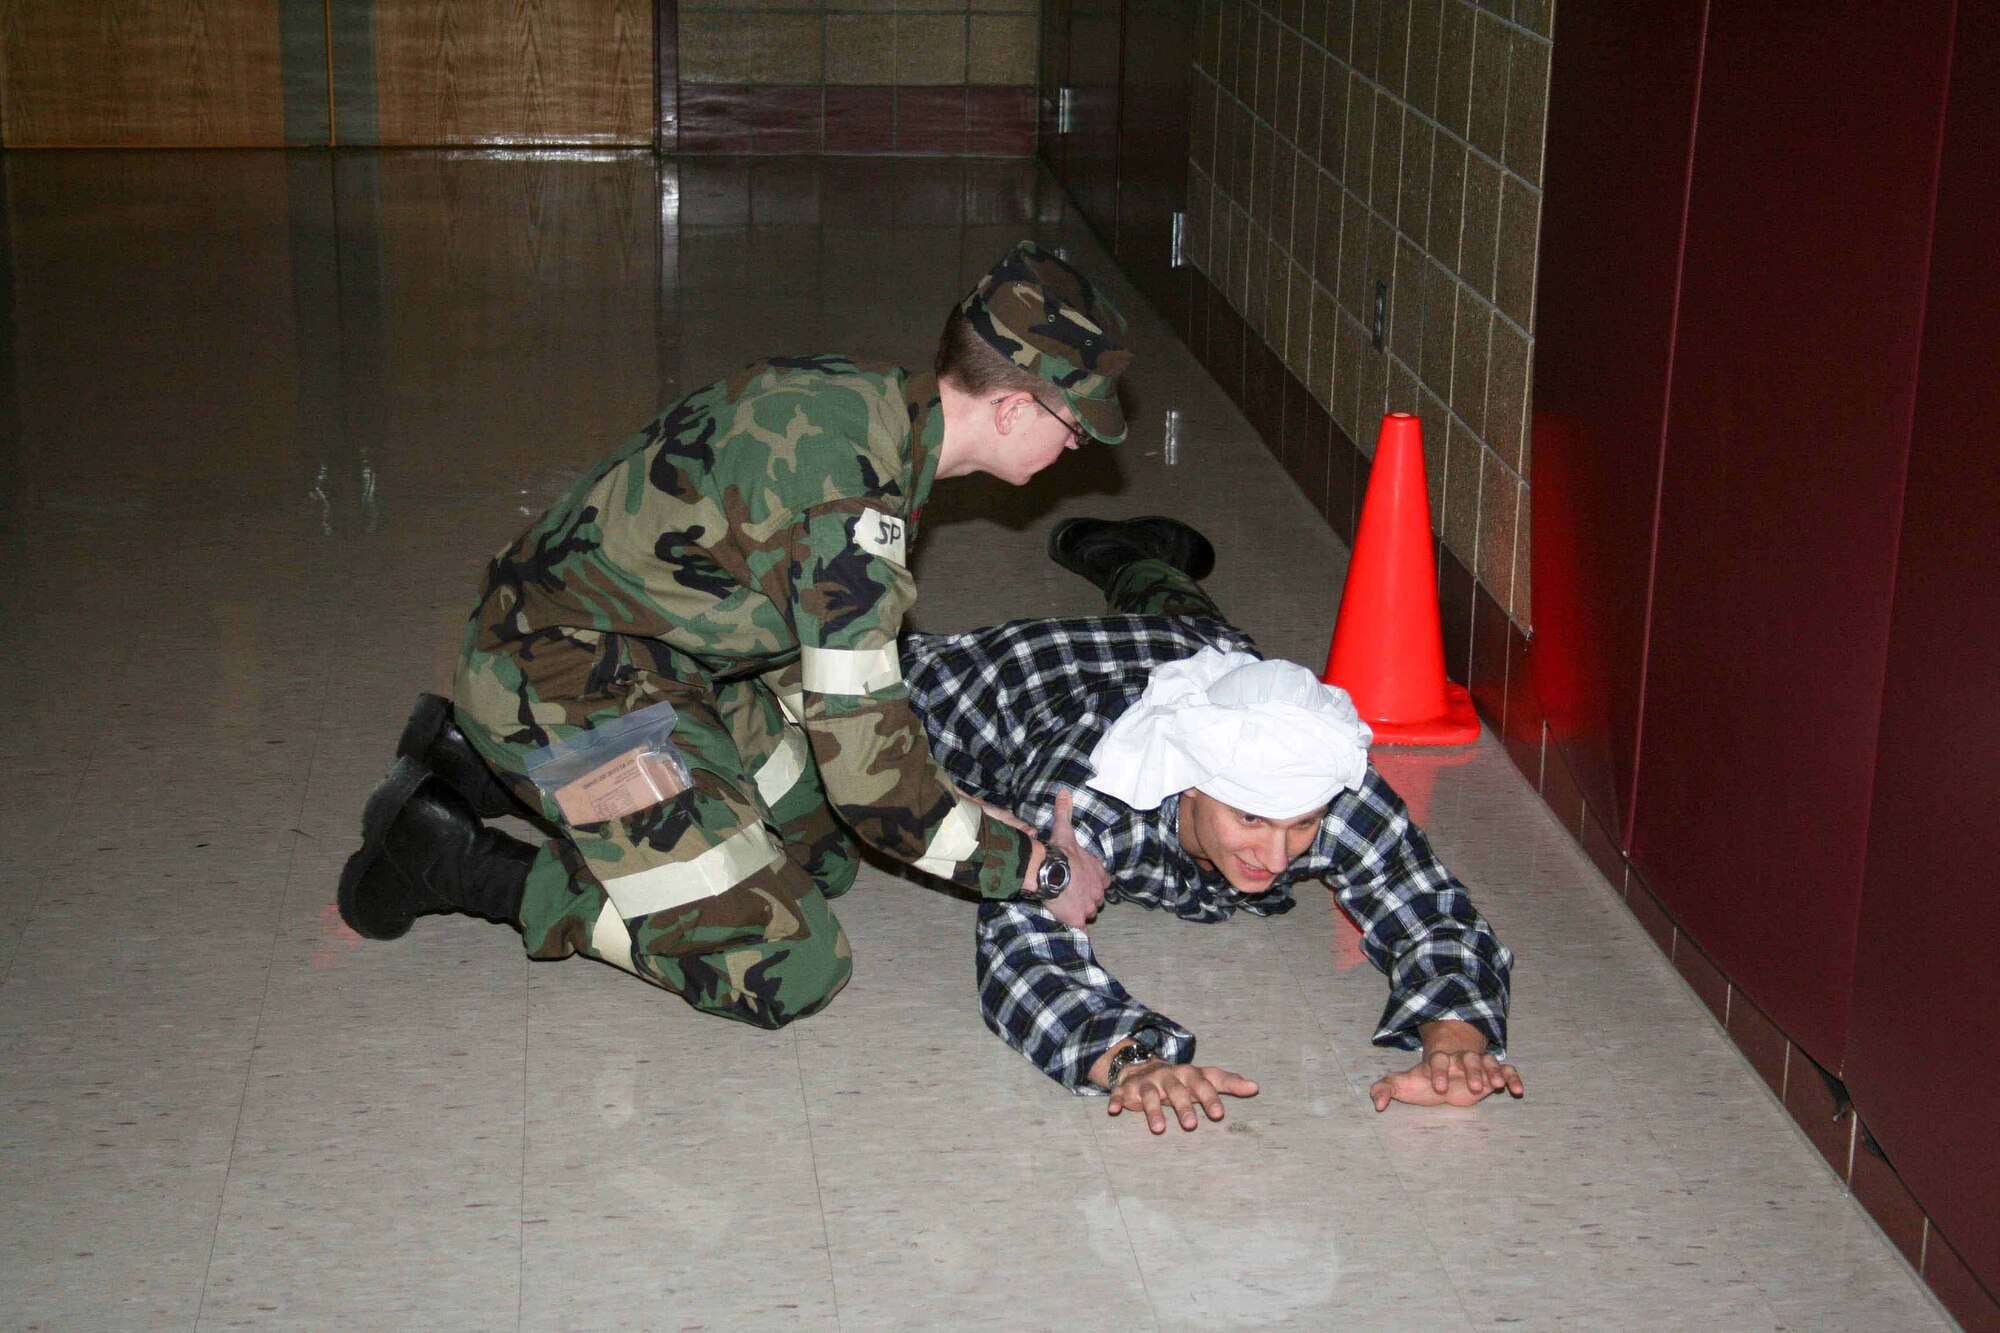 Cadet 4th Class Mark Kubat, AFROTC Detachment 610, restrains an "insurgent"  during a Mock Deployment Exercise on February 28, 2009 at the Grand Forks Army National Guard Base in Grand Forks, North Dakota. The exercise trained 100 cadets about the different aspects of a deployment and how to react to combat situations. (photo by C/3c Kyle Schroeder) (Released) 